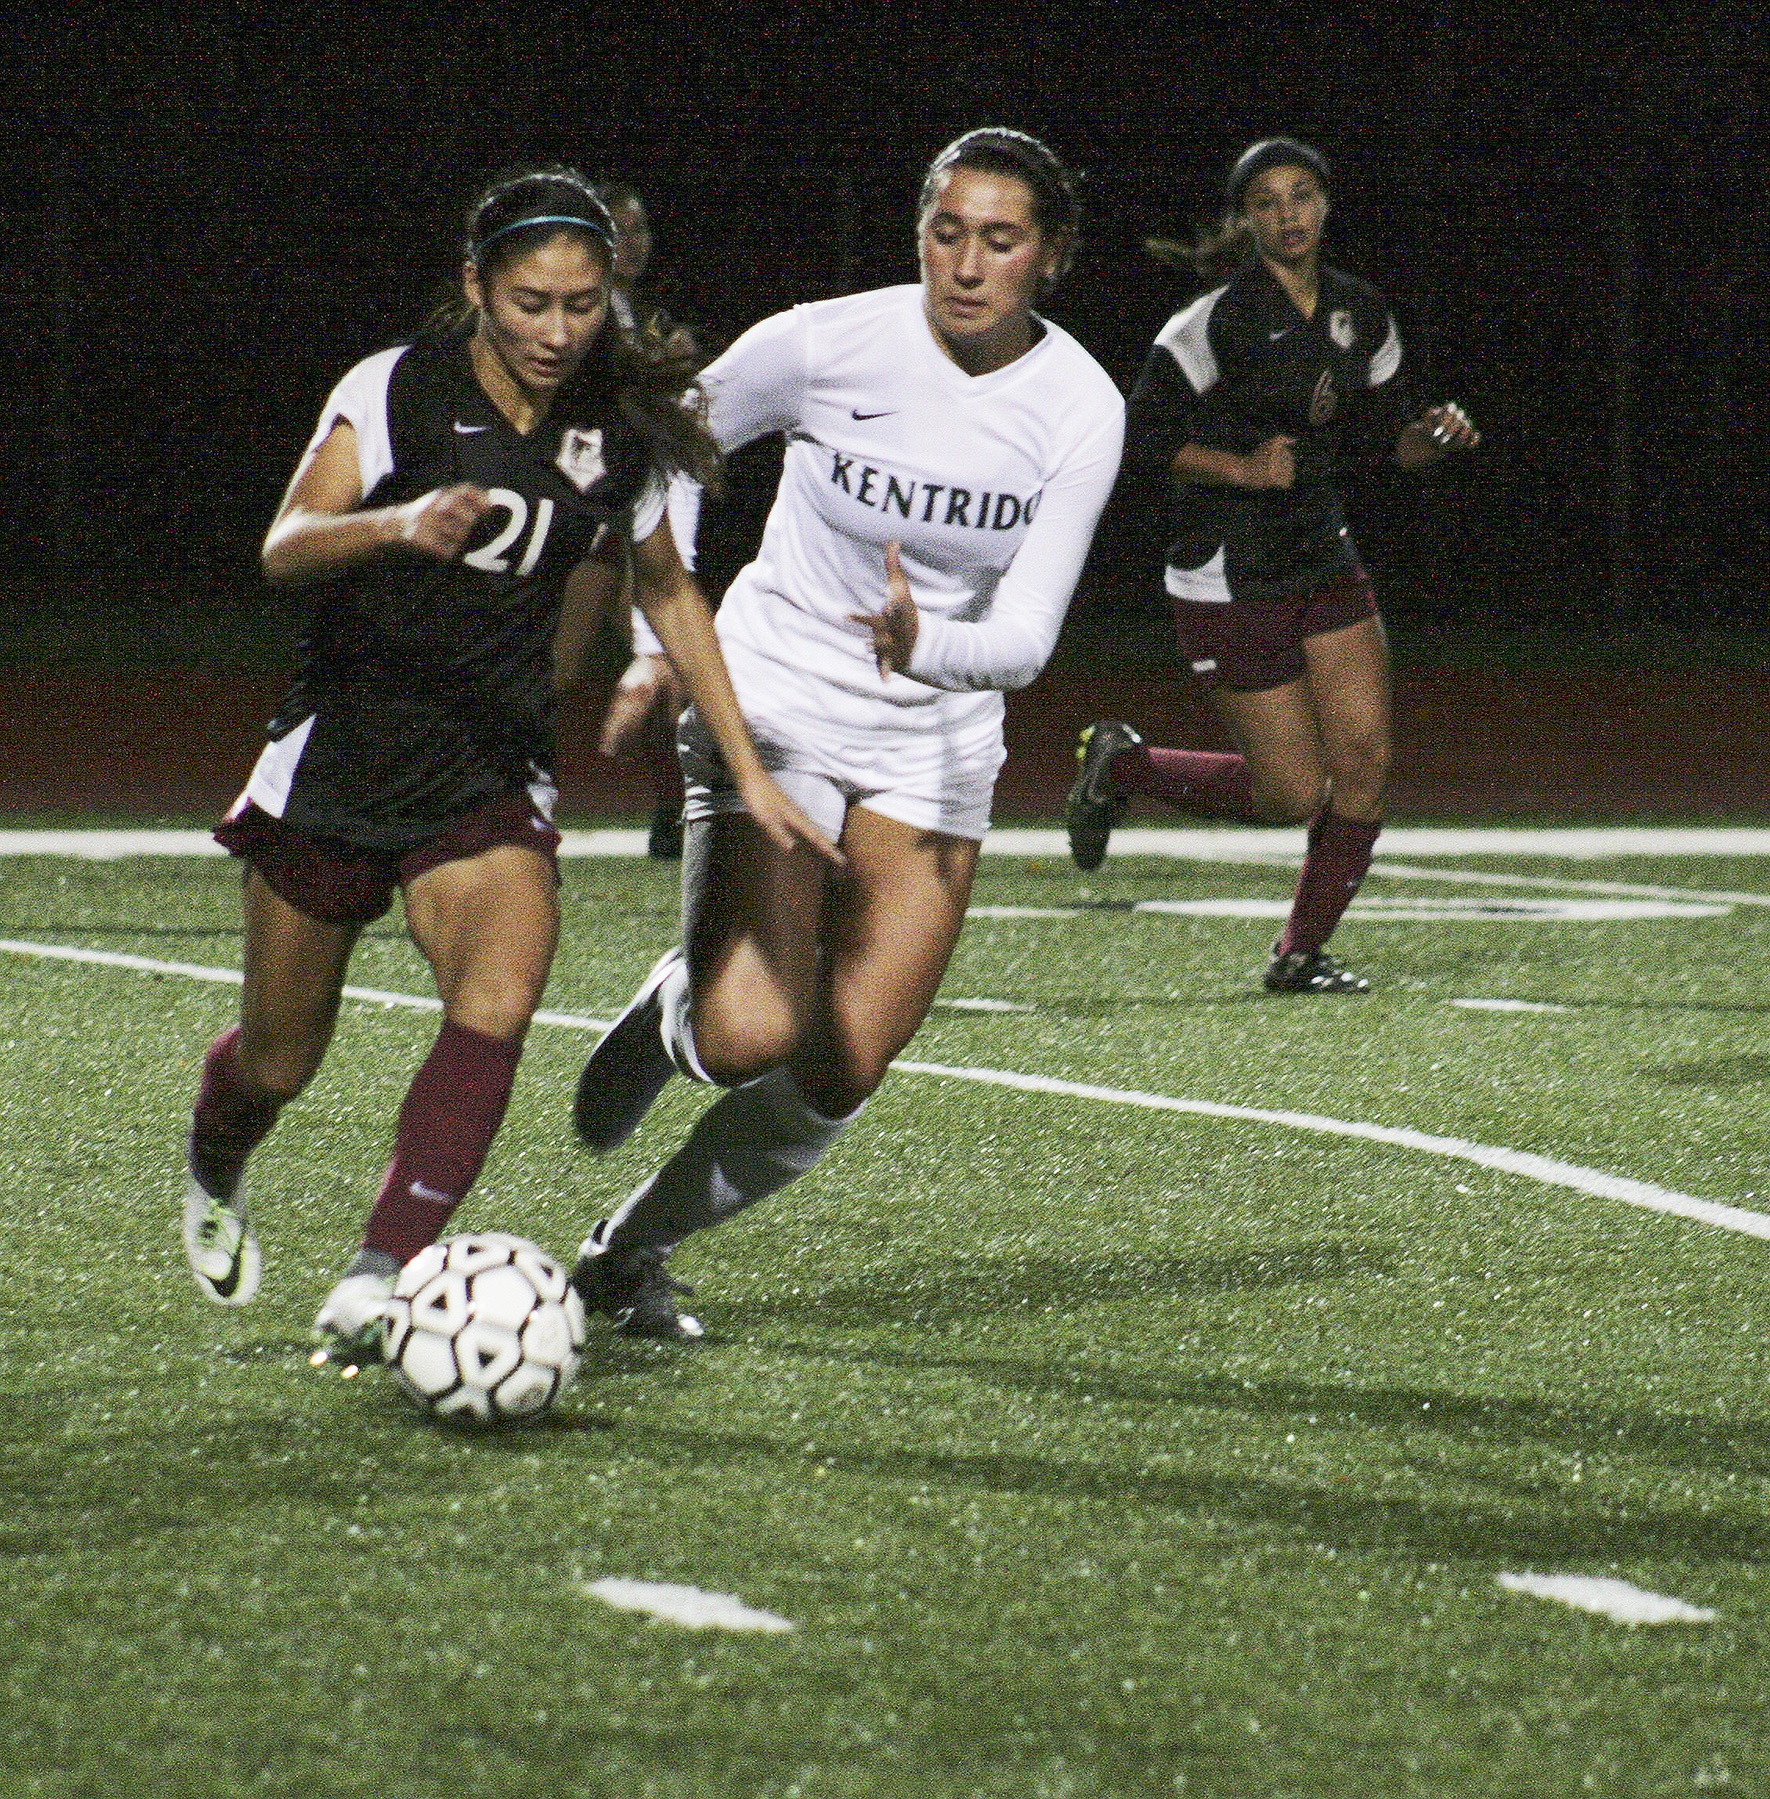 Kentlake junior Alexis Newsom tries to maintain possession of the ball during Friday’s away game at Kentridge High School. The Falcons lost to the Chargers 3-0. SARAH BRENDEN